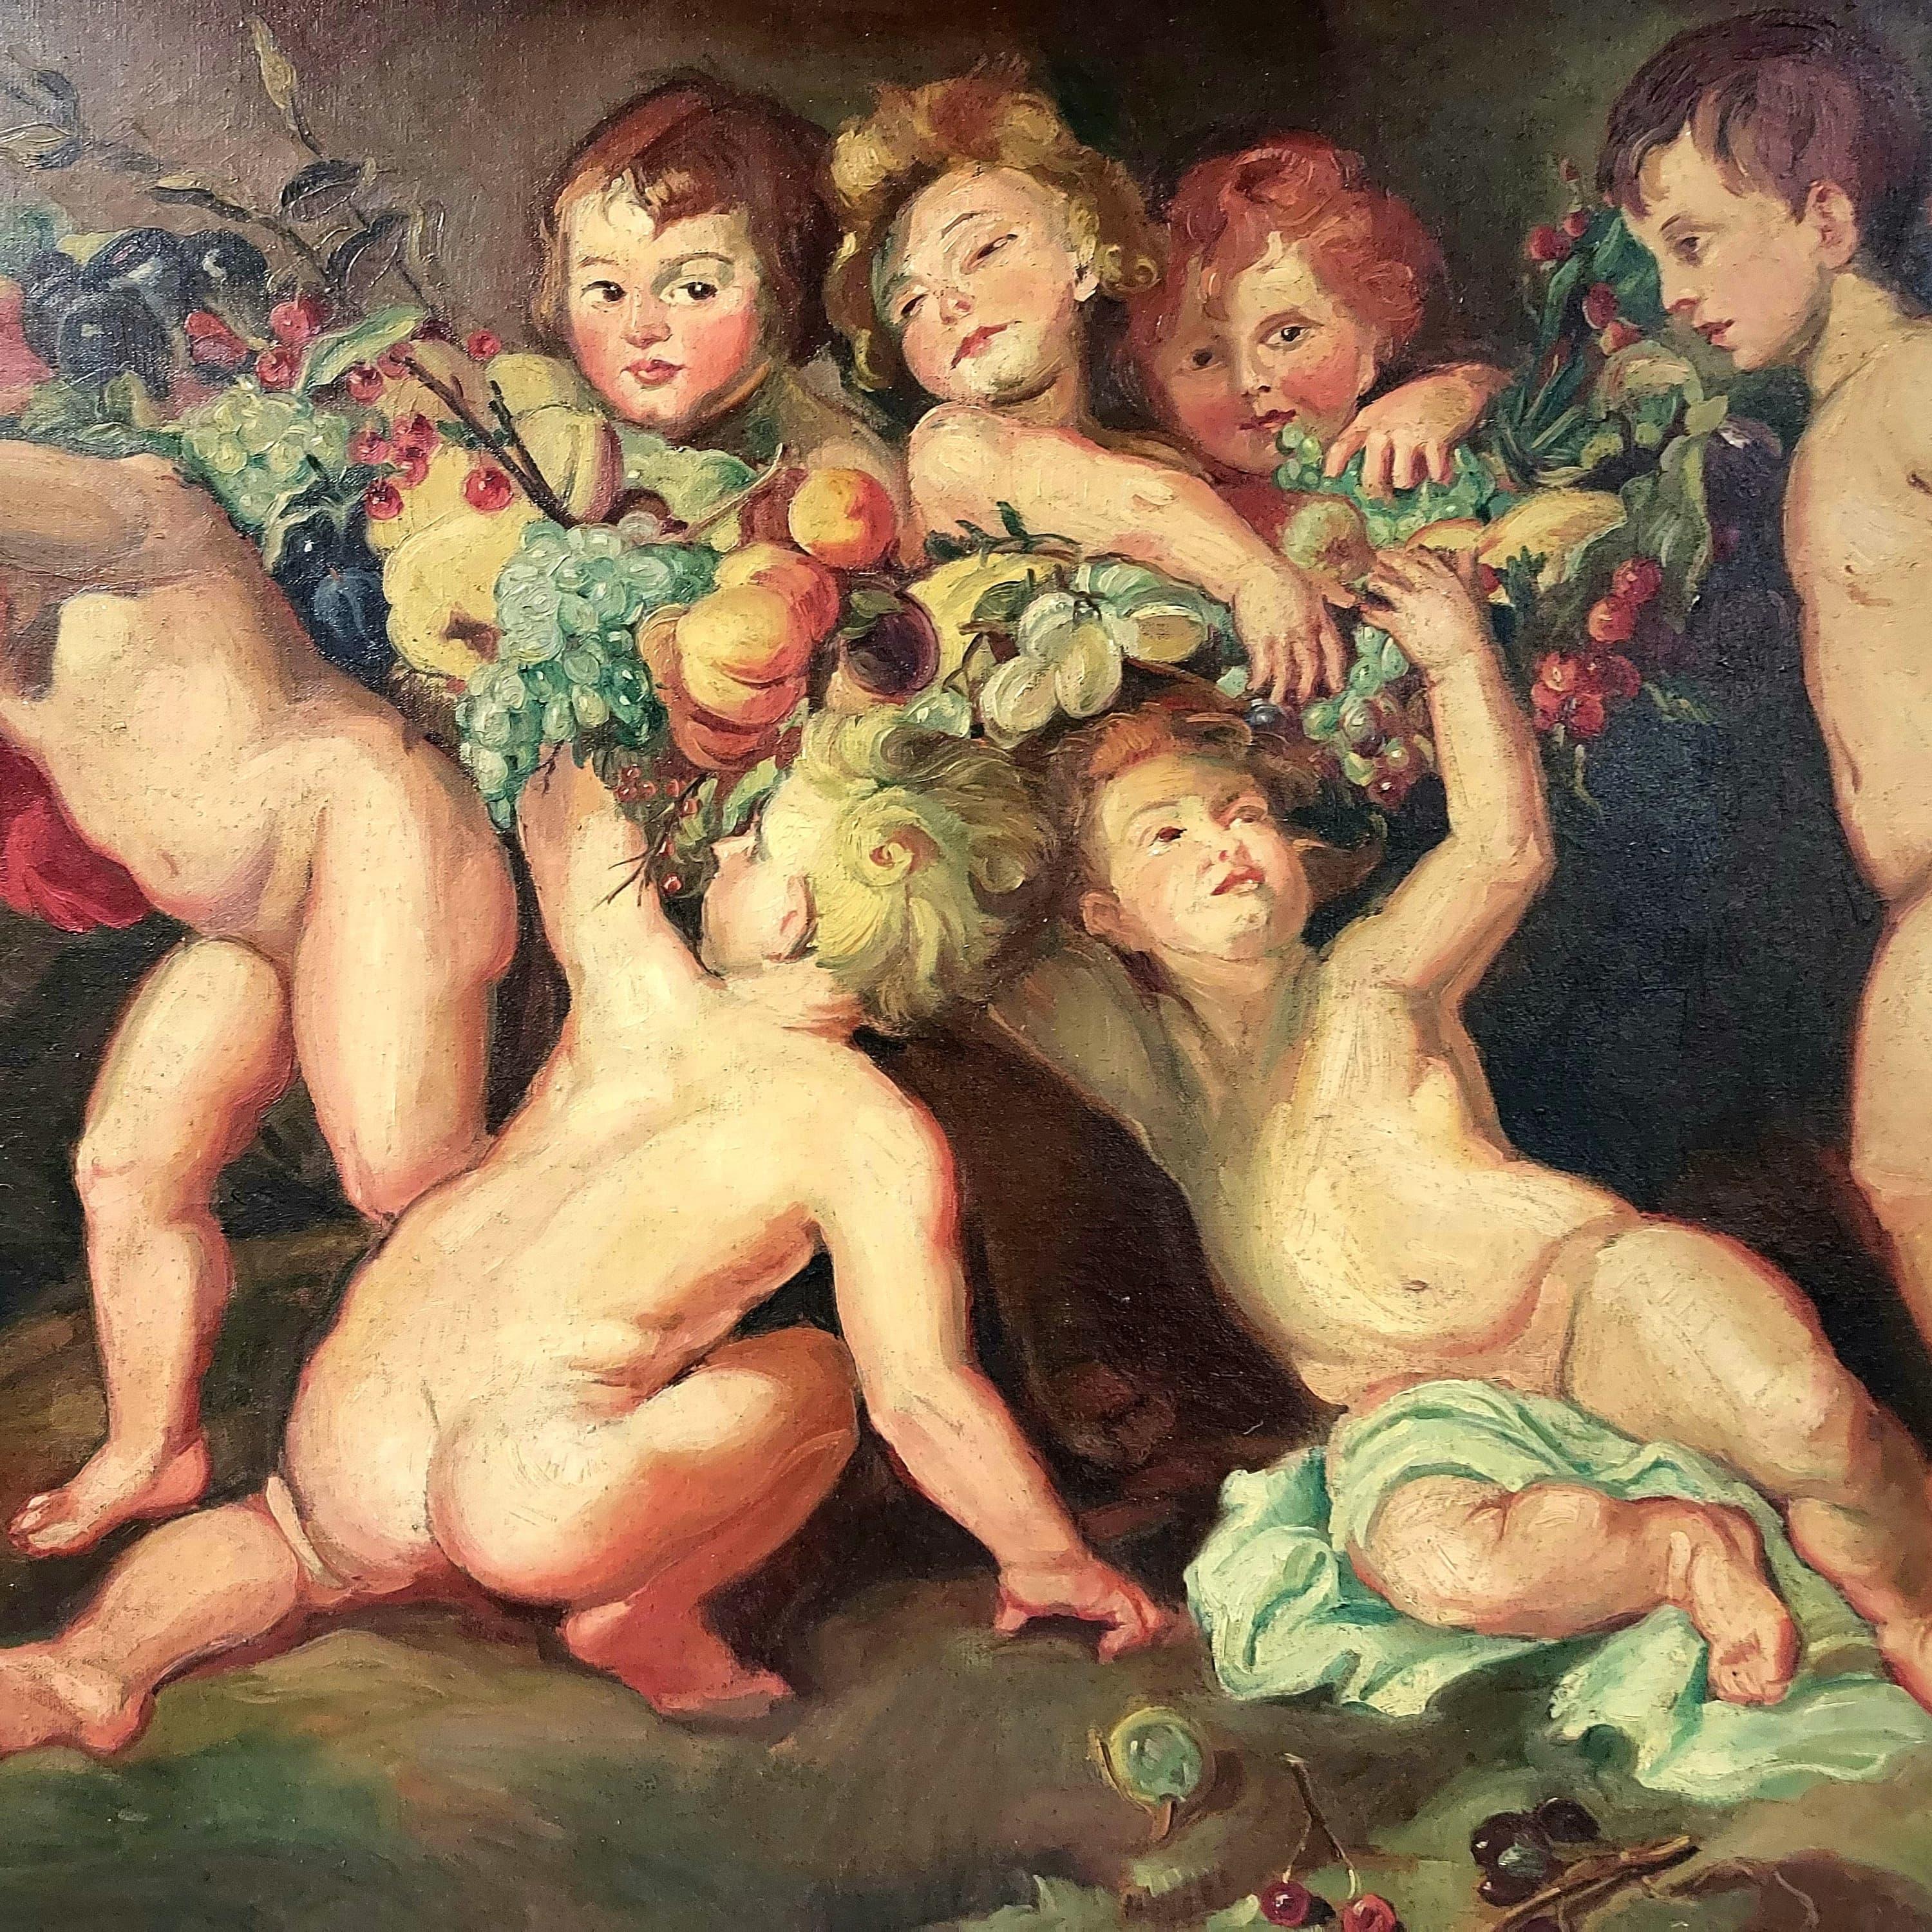 Garland Of Fruit is a painting by Peter Paul Rubens
Sir Peter Paul Rubens  Dutch: 28 June 1577 – 30 May 1640) was a Flemish artist and diplomat from the Duchy of Brabant in the Southern Netherlands (modern-day Belgium). He is considered the most